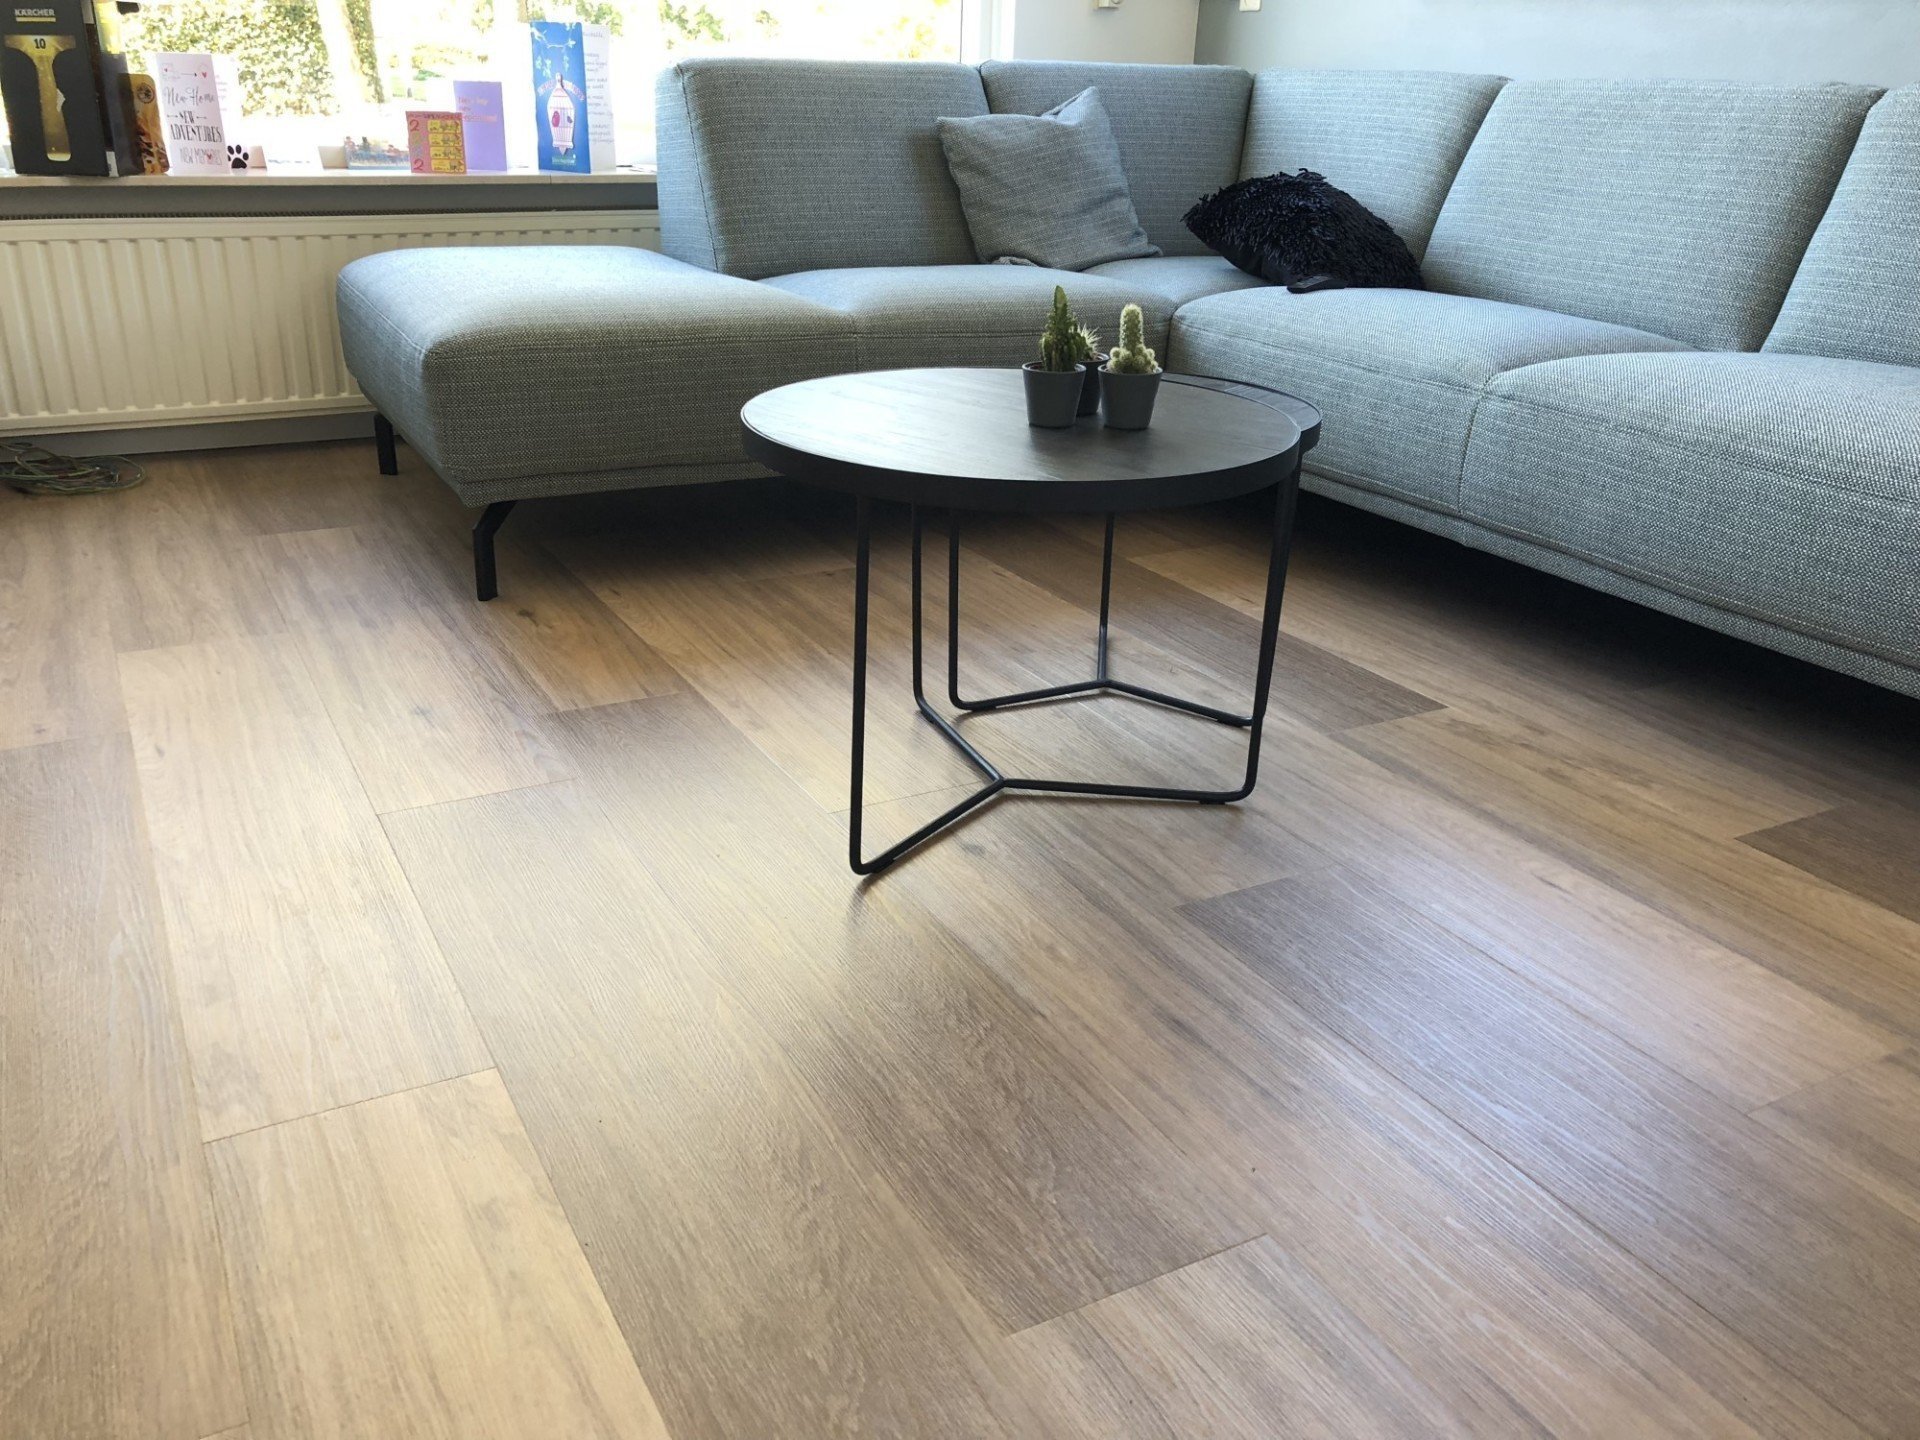 Is Vinyl Plank Flooring Right For You? Discover The Pros And Cons